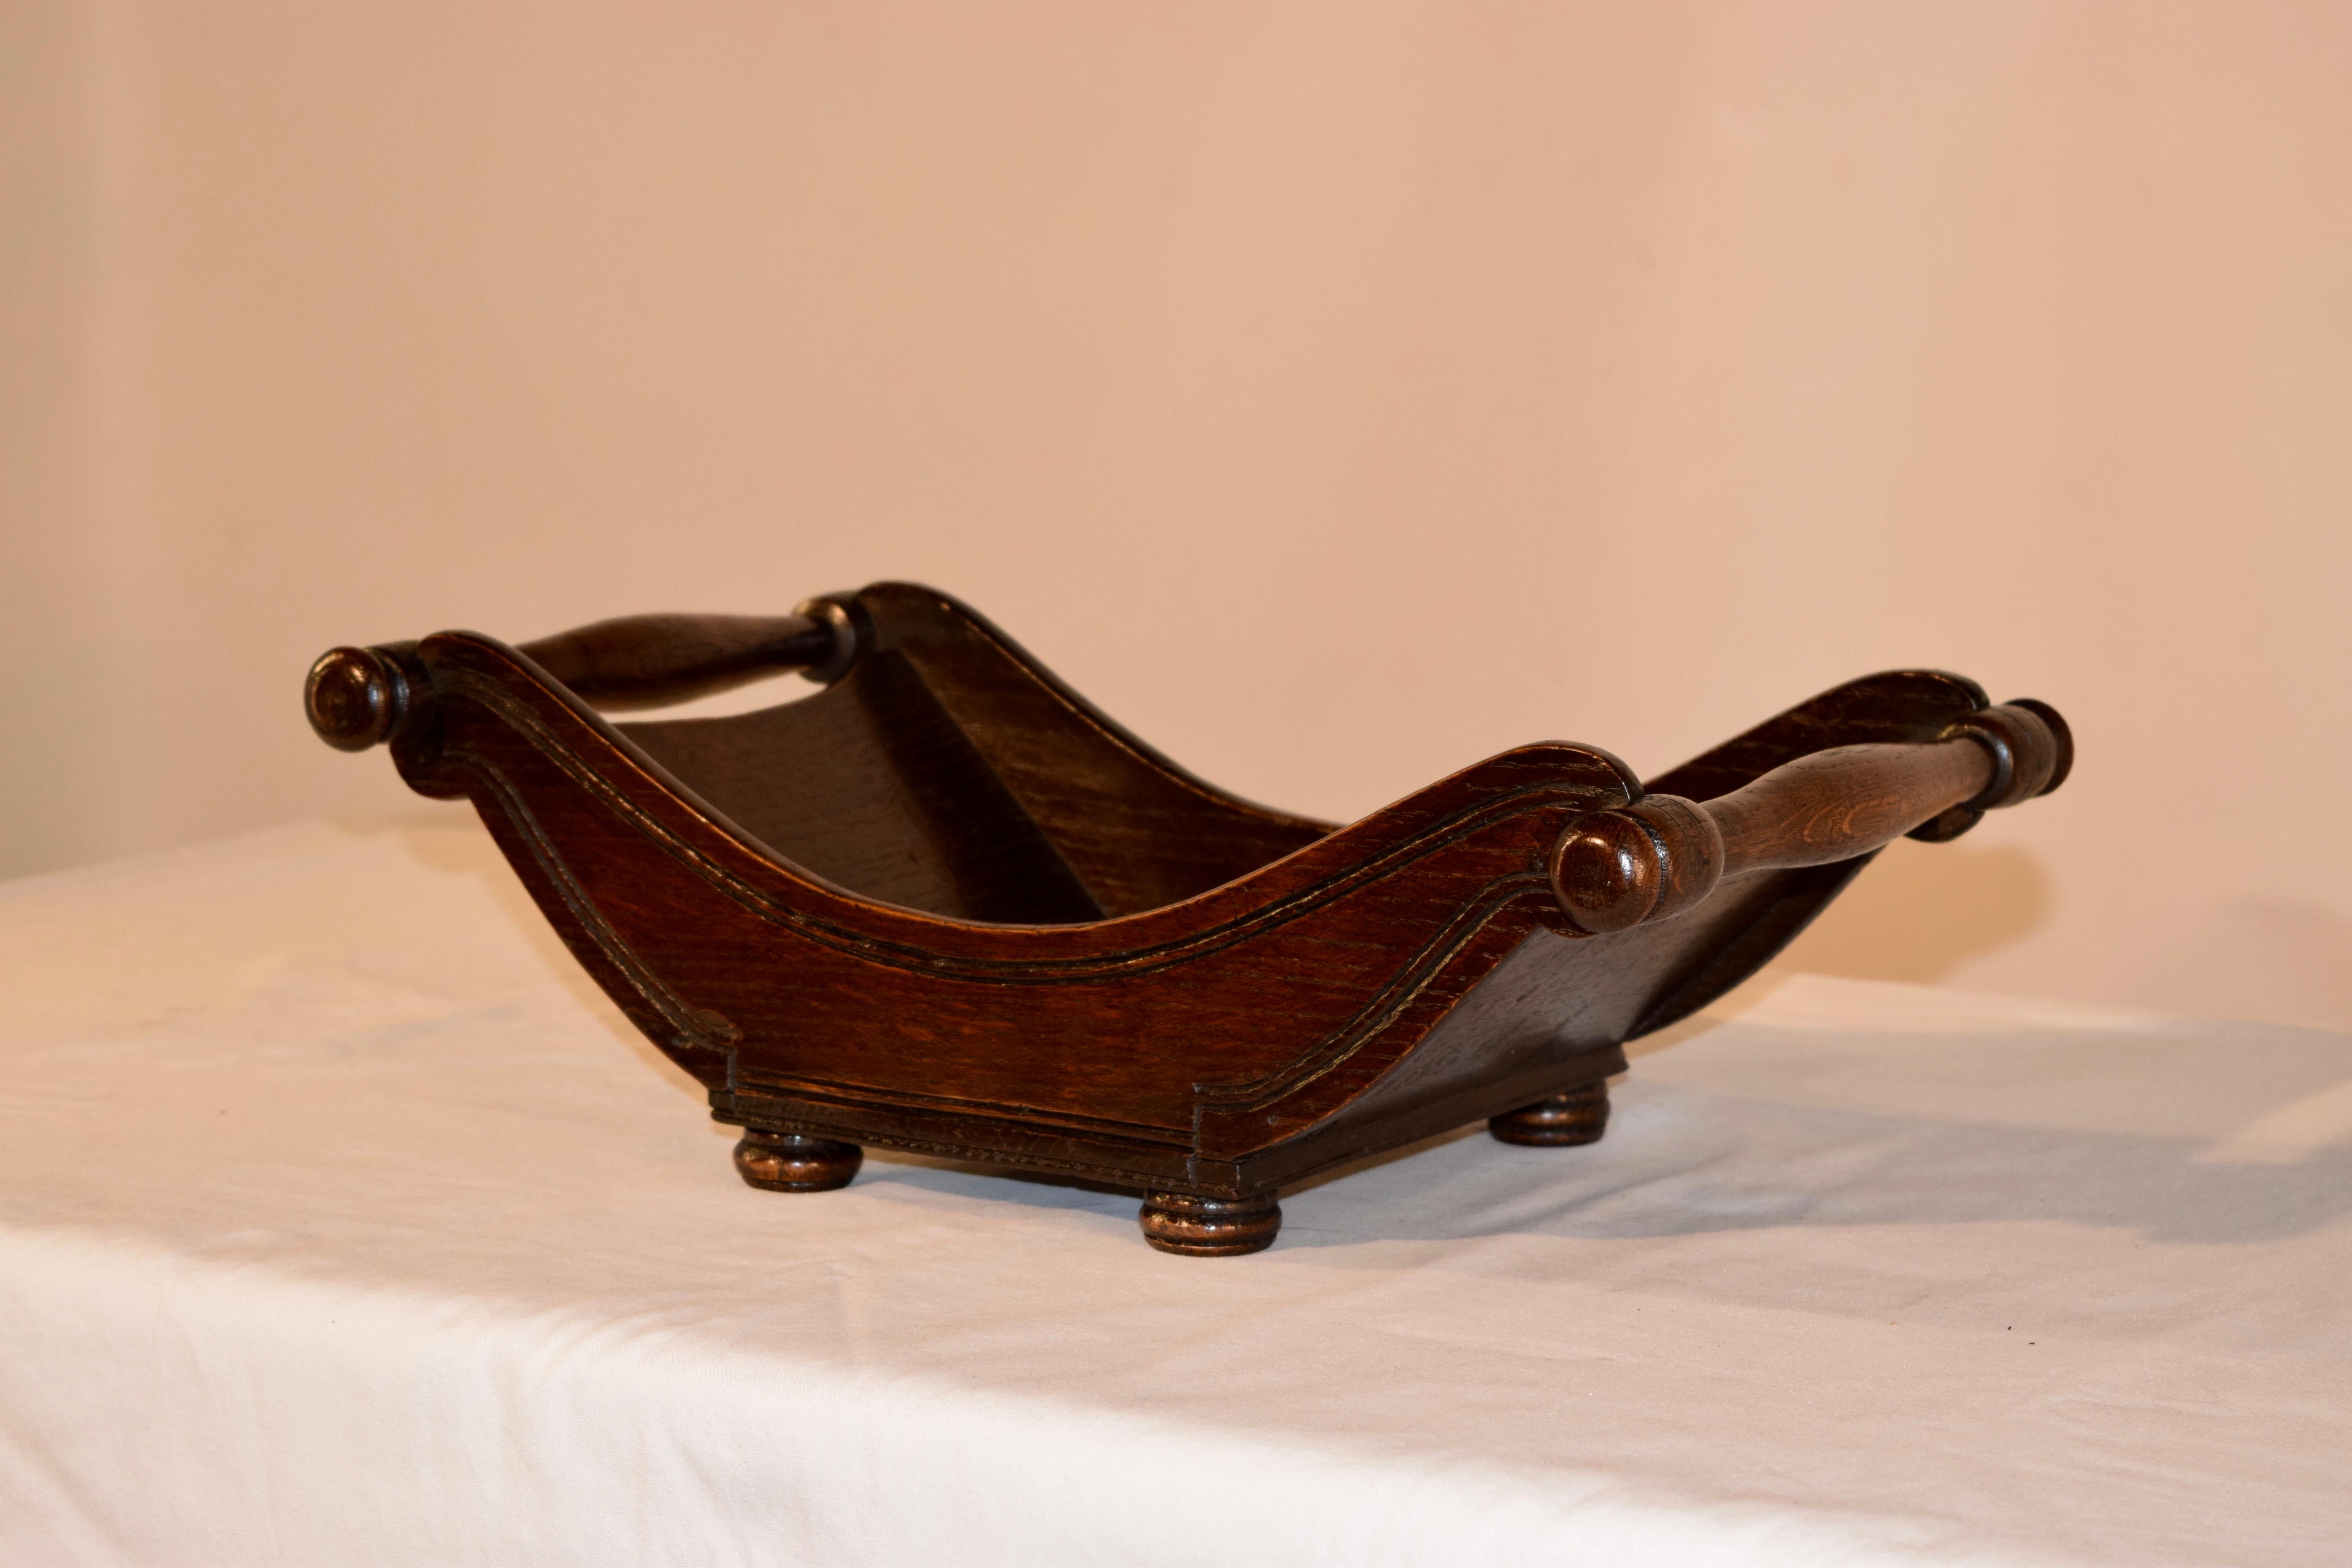 19th century English oak cheese cradle with a wonderful sleigh shaped base and hand turned handles with lovely hand turned finials on the ends. Raised on hand turned feet.